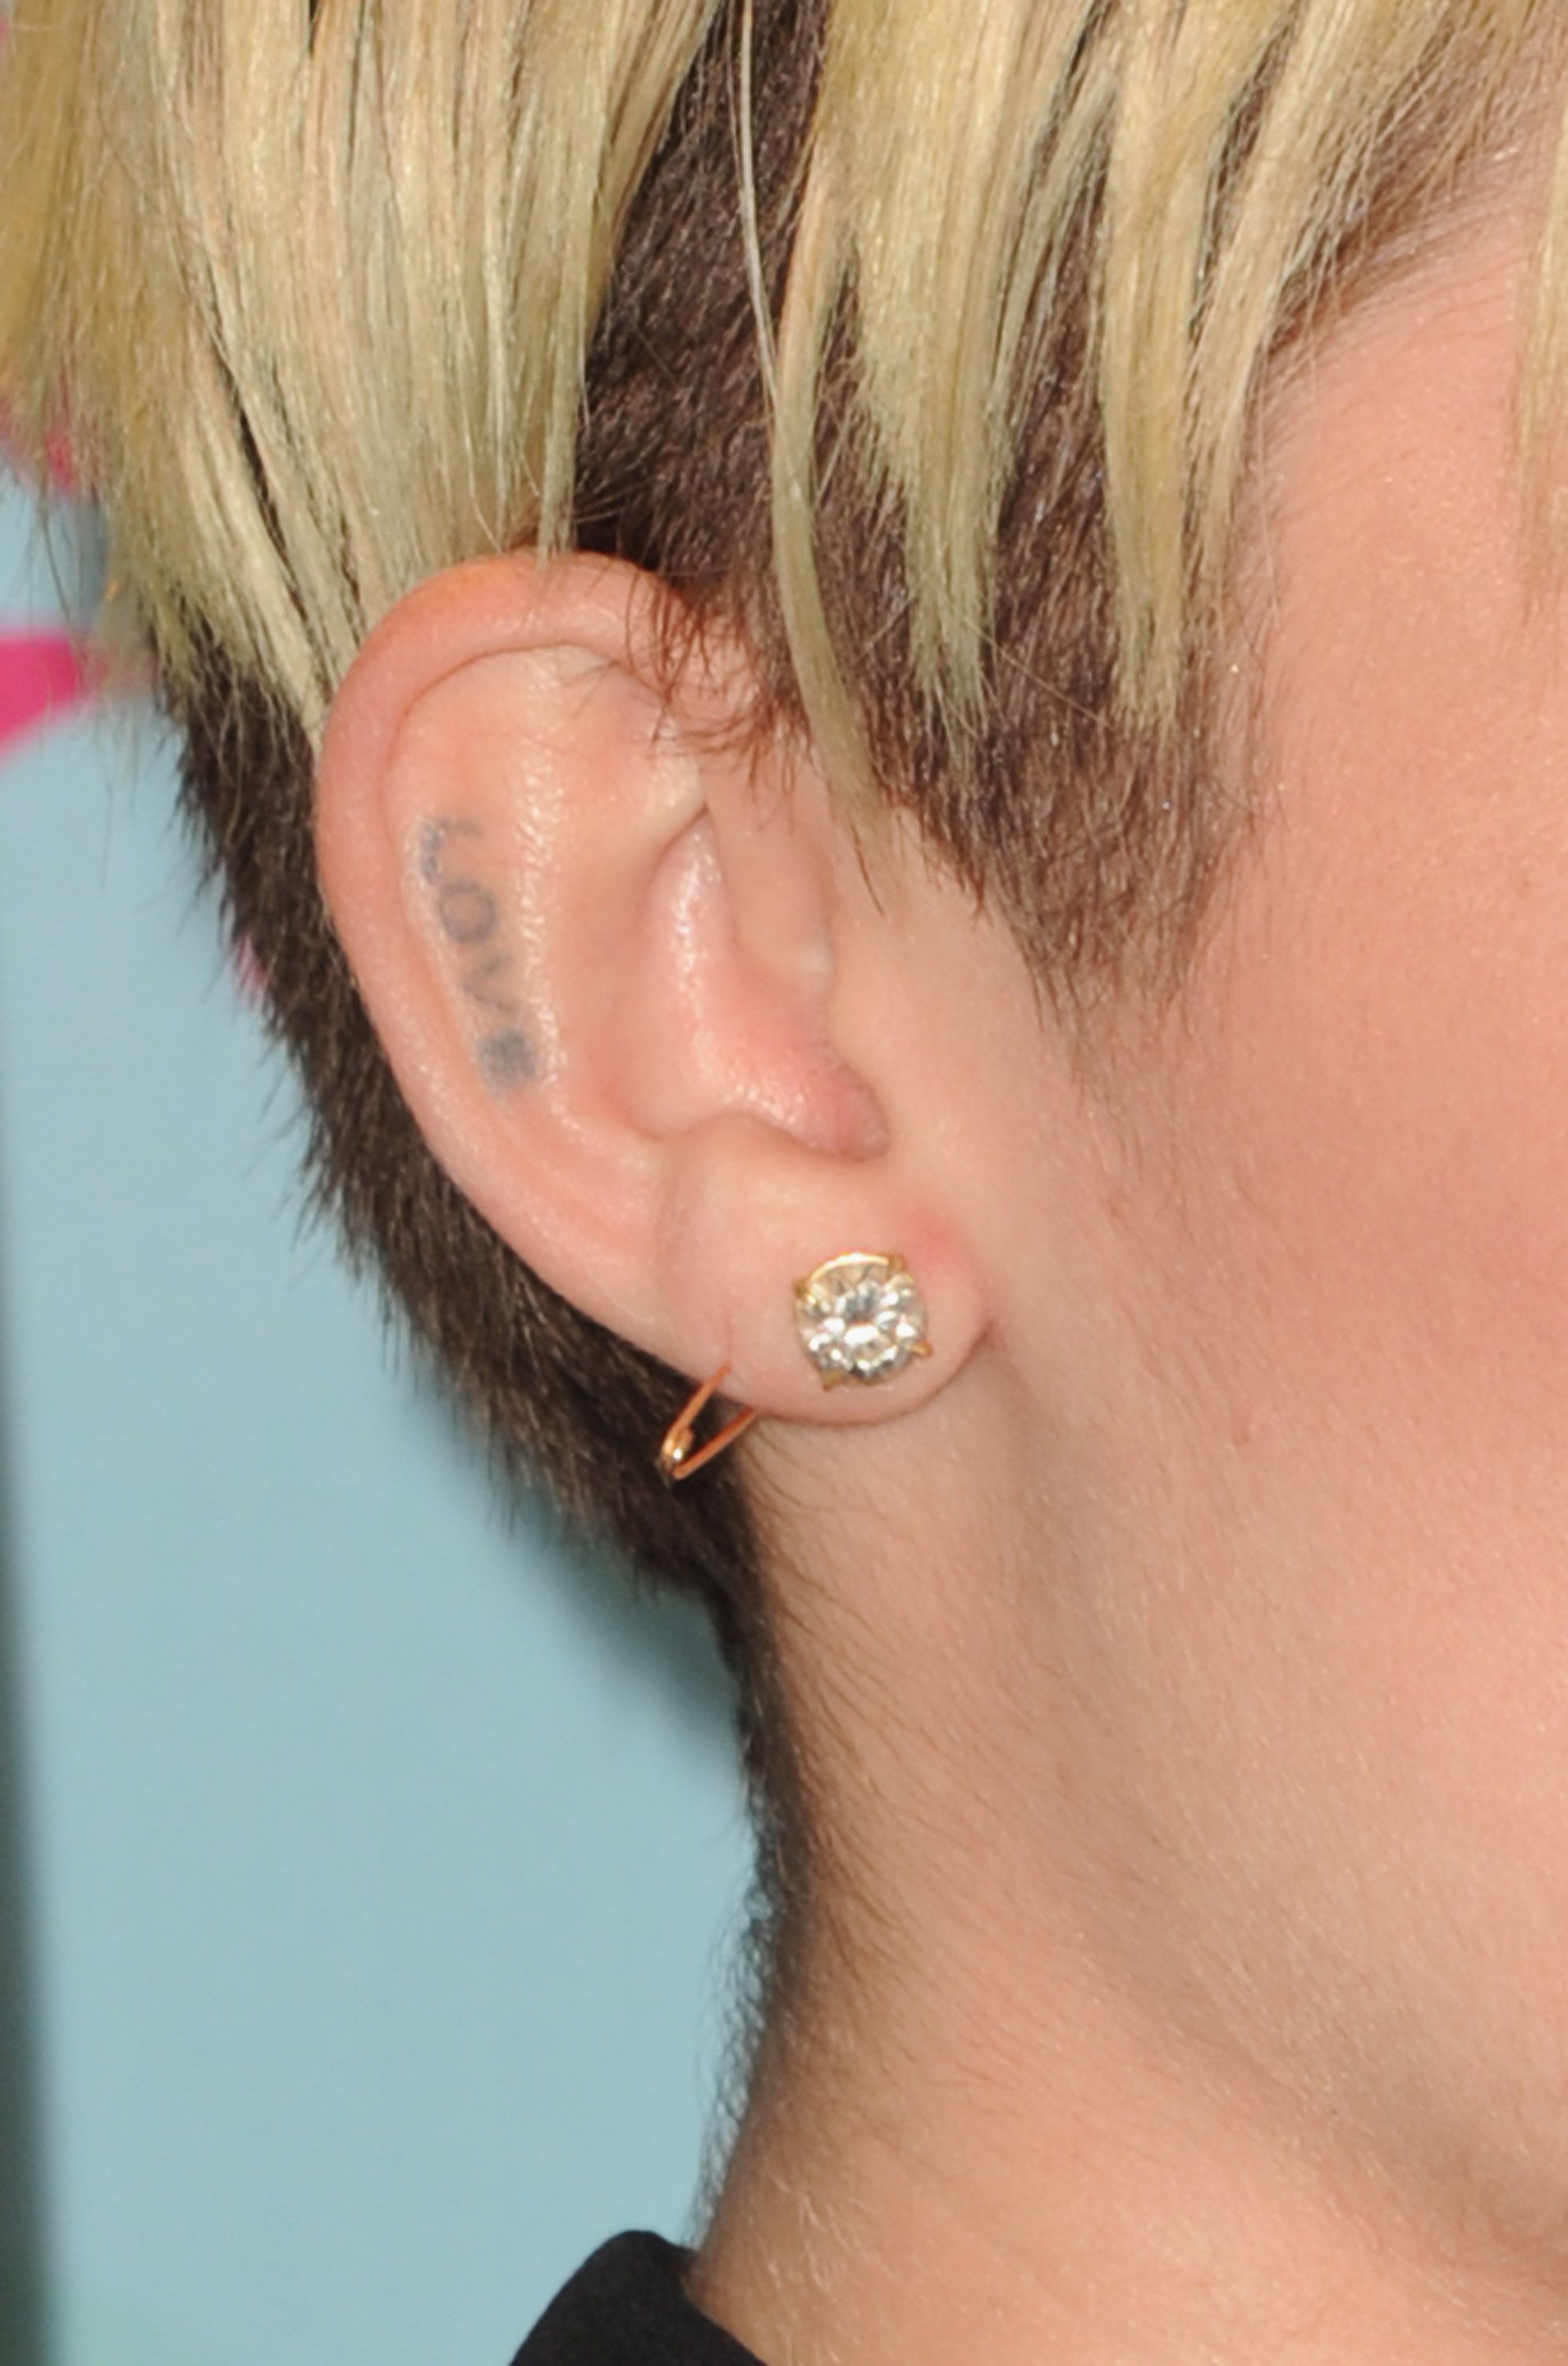 All of Miley Cyrus' Tattoos â€“ Miley Cyrus Tattoos and Their Meaning